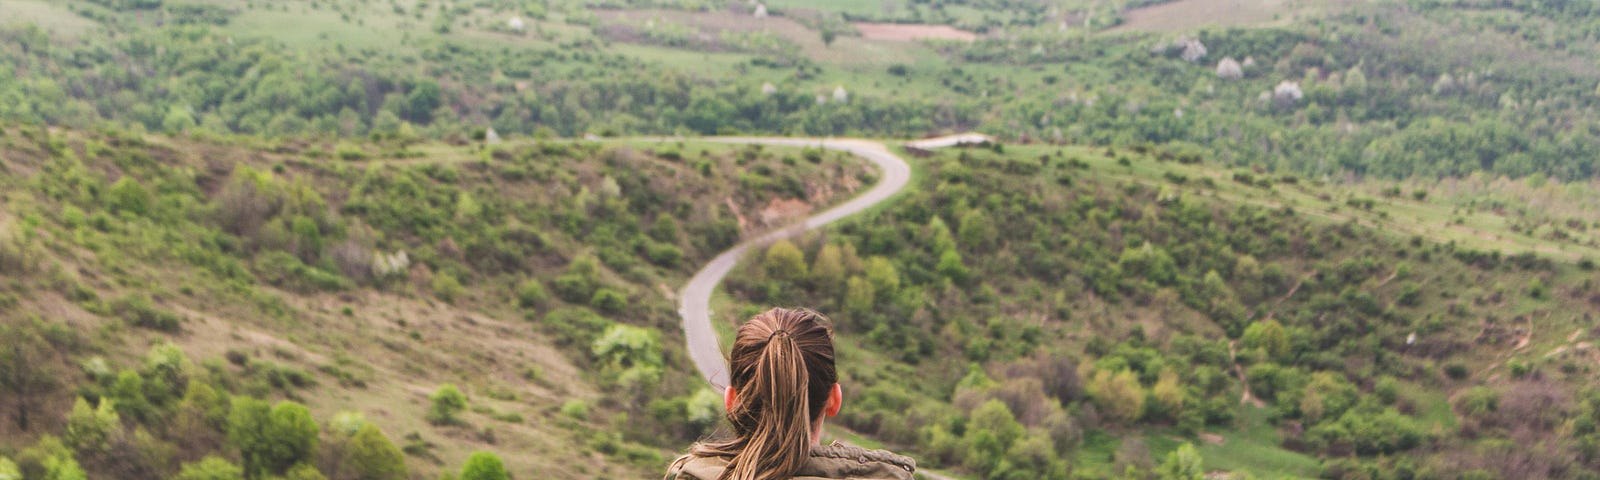 Person with a ponytail wearing a green jacket sits on a cliff, overlooking a winding path through a vast, green landscape, symbolizing the journey towards personal freedom and contemplation.